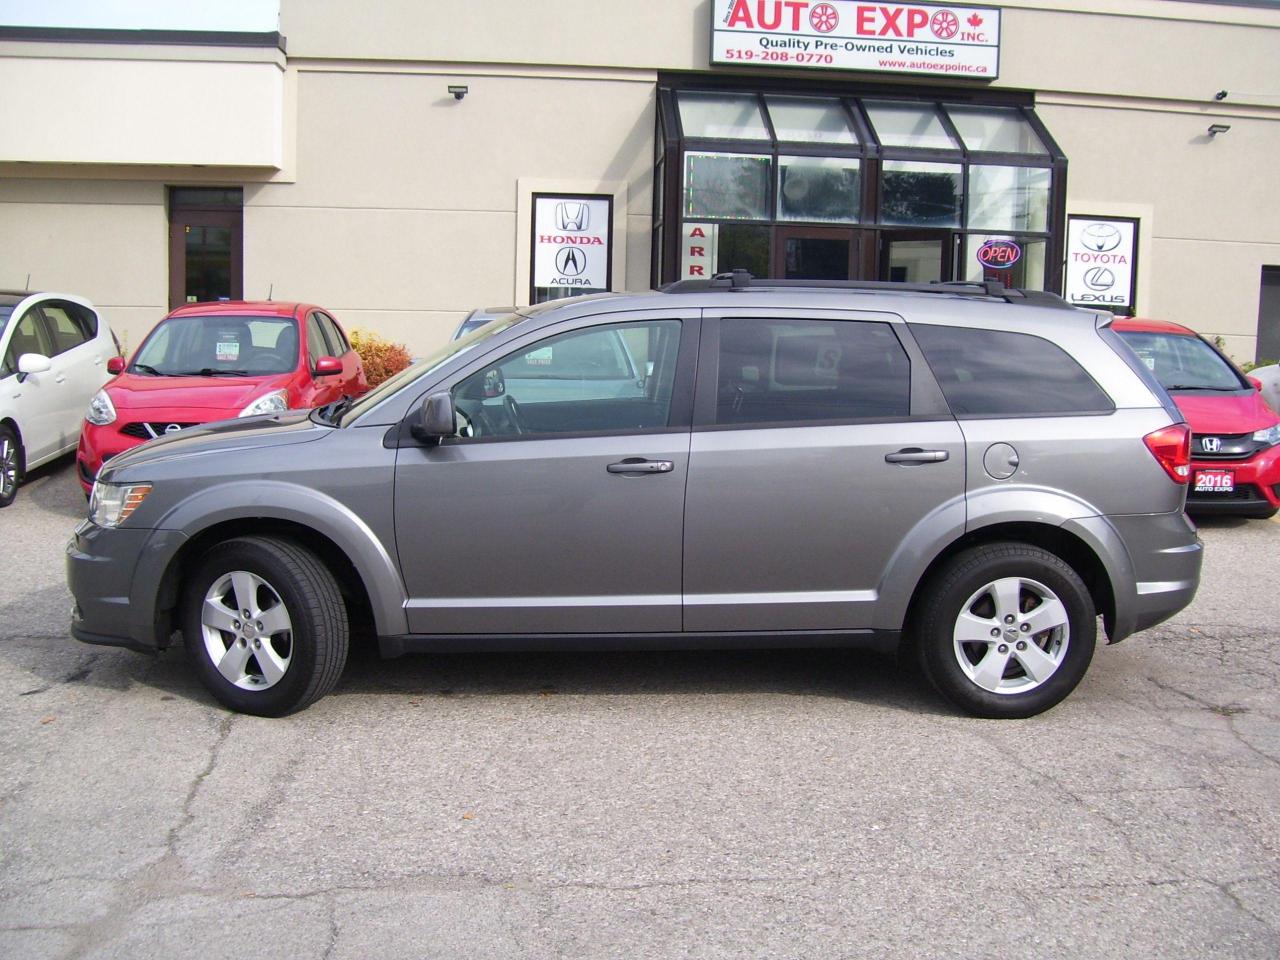 2012 Dodge Journey SE+,Bluetooth,Tinted,Roof Rack,Alloy,Certified,CD - Photo #10